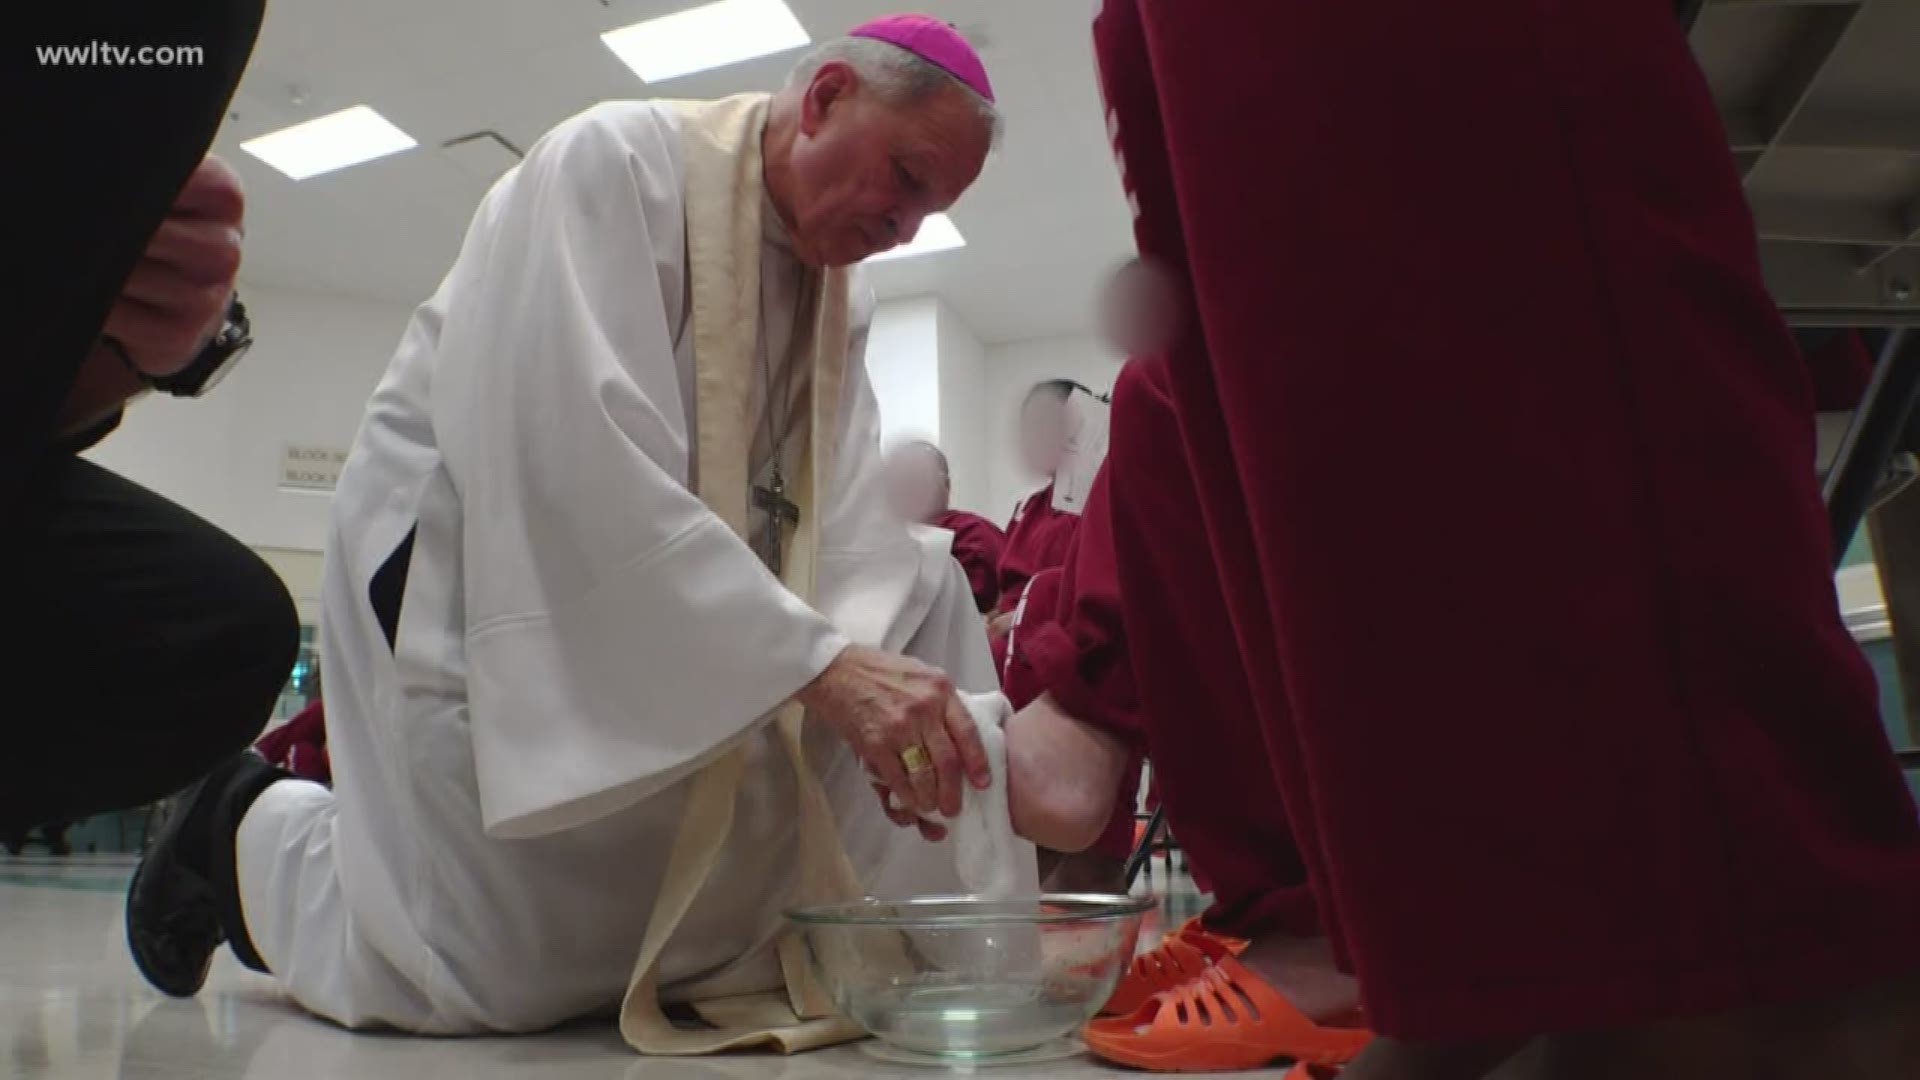 New Orleans Archbishop Gregory Aymond washed the feet of prisoners Thursday in what has become a new tradition.